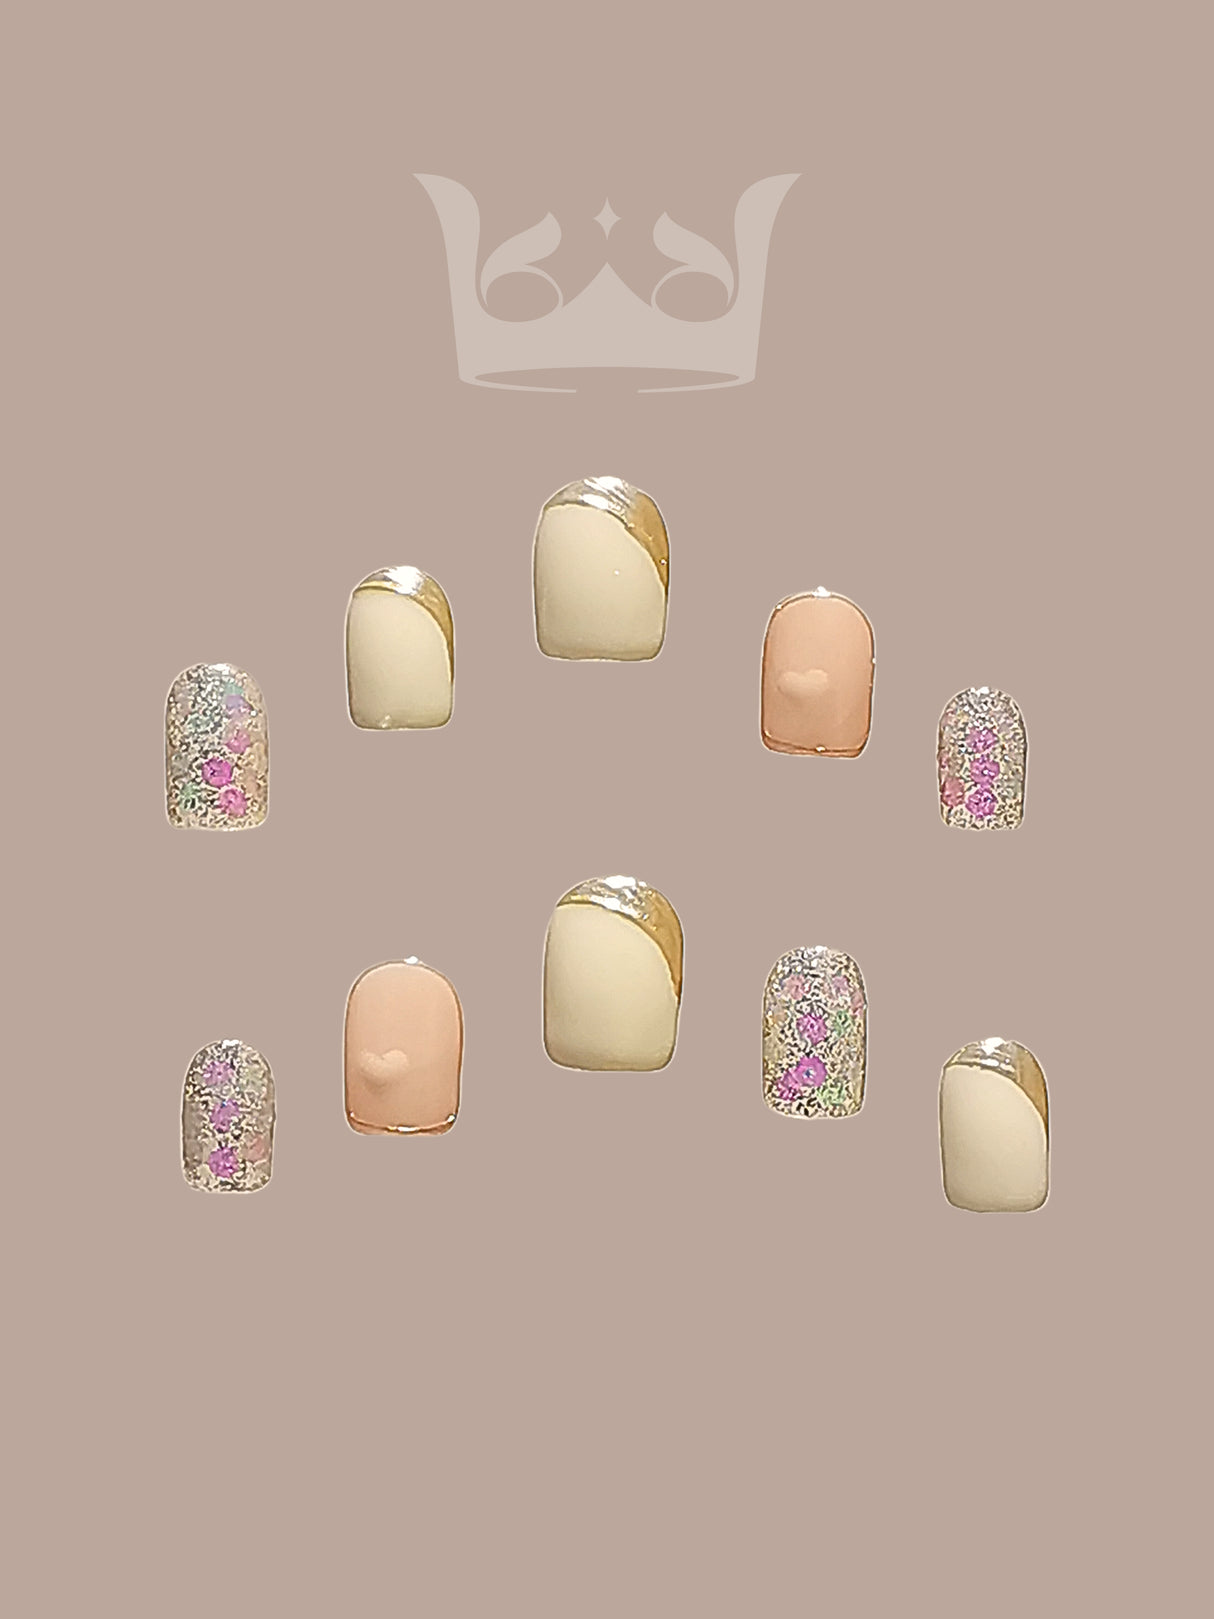 These press-on nails offer an elegant and modern twist on the classic French manicure with a nude base, gold accents, and iridescent flakies for a glittery look. 